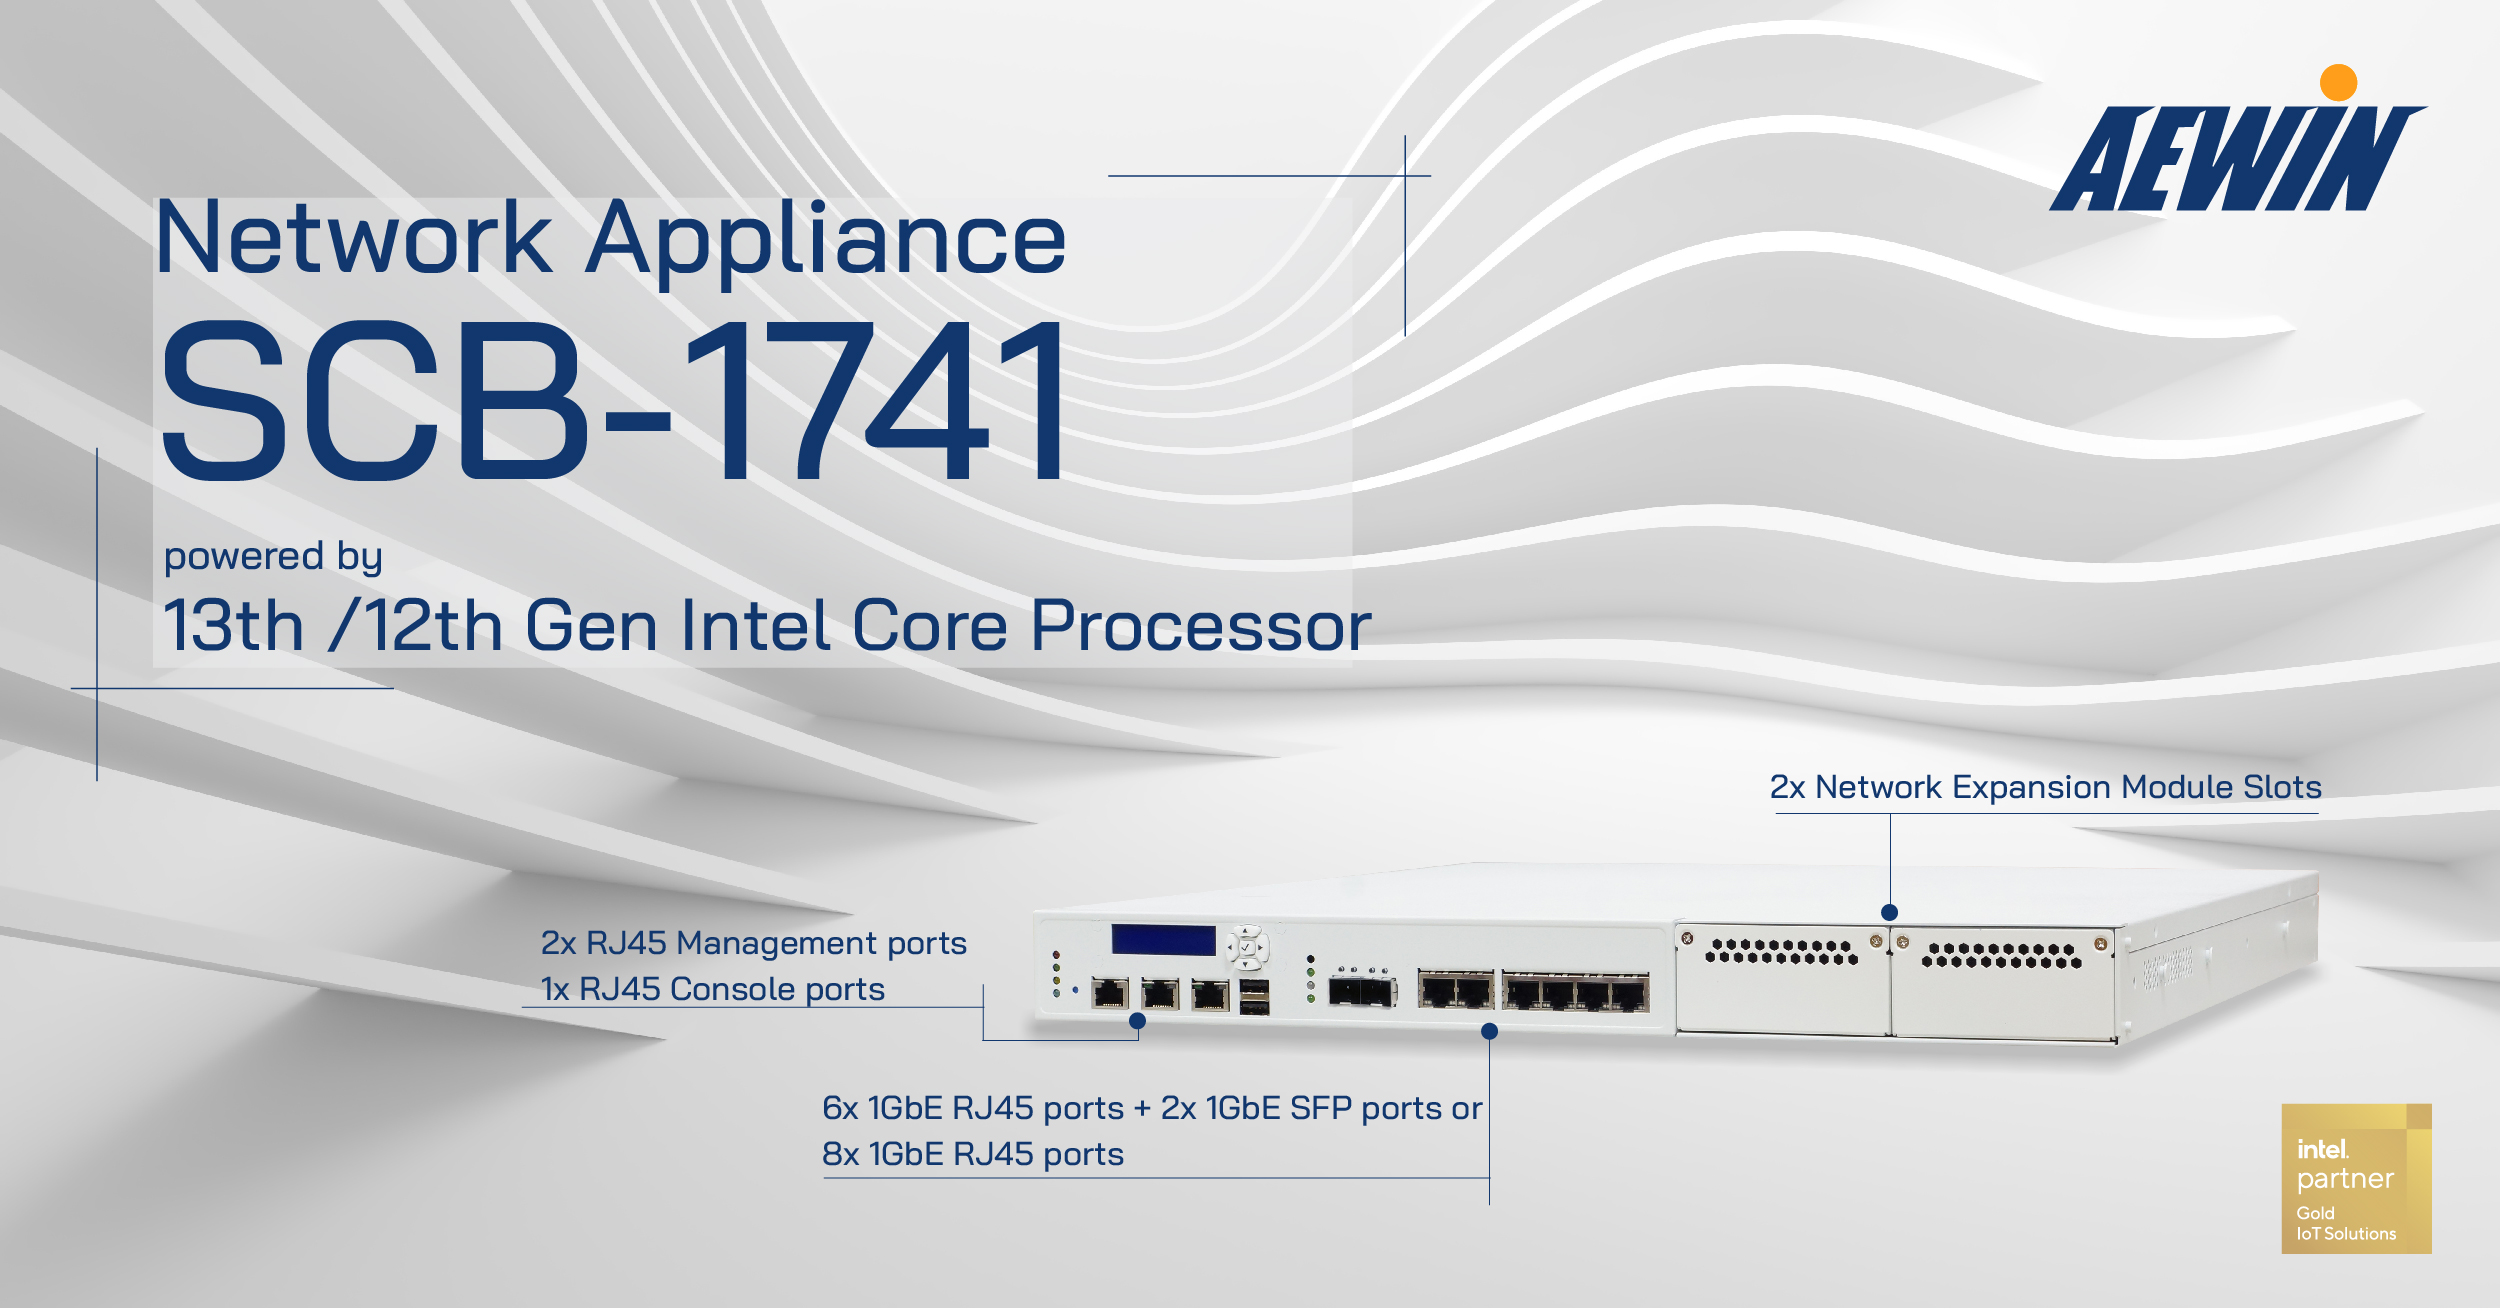 network appliance scb-1741 with 13/12th intel core